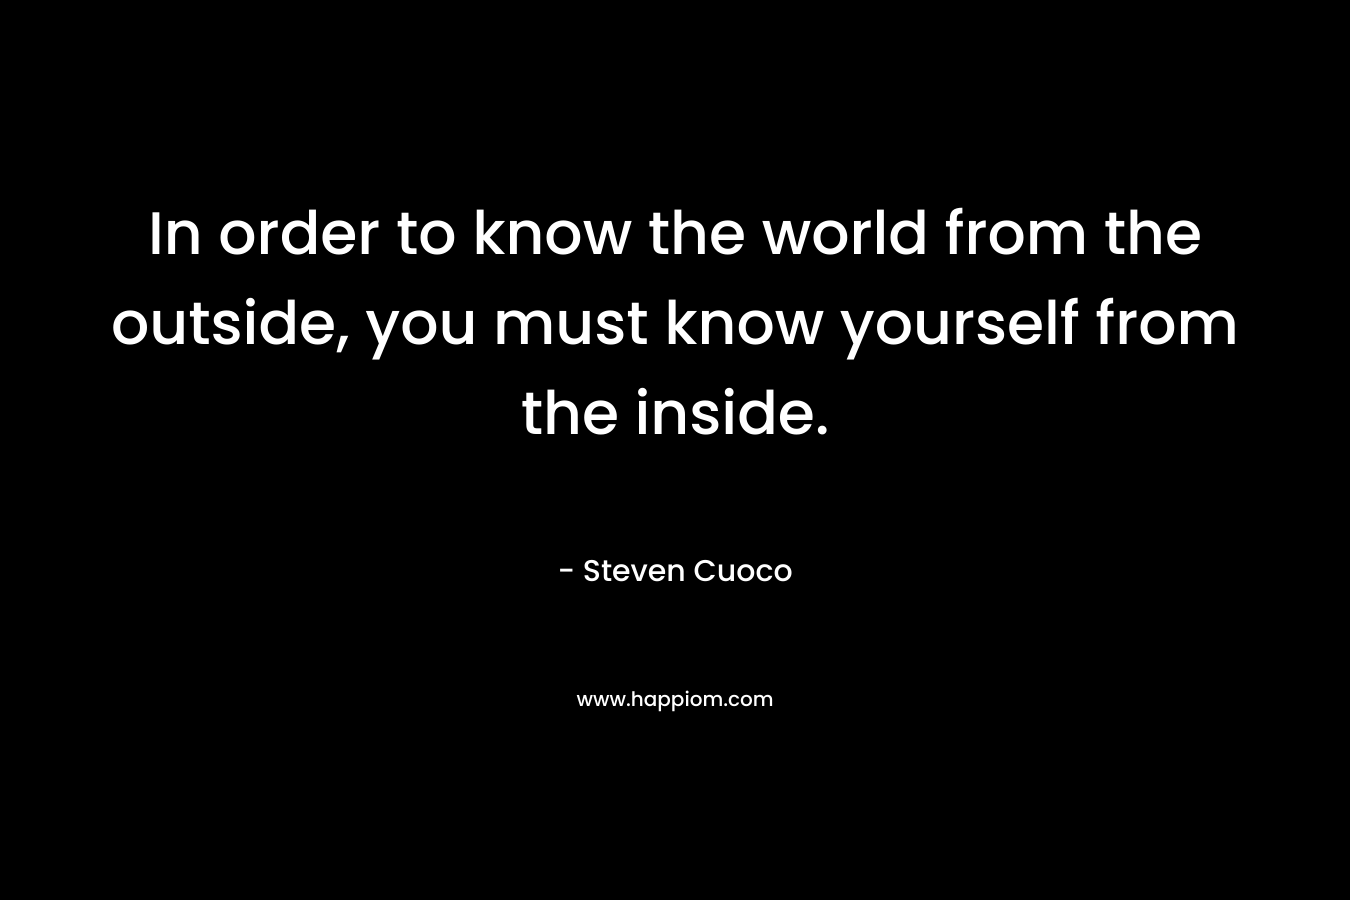 In order to know the world from the outside, you must know yourself from the inside.